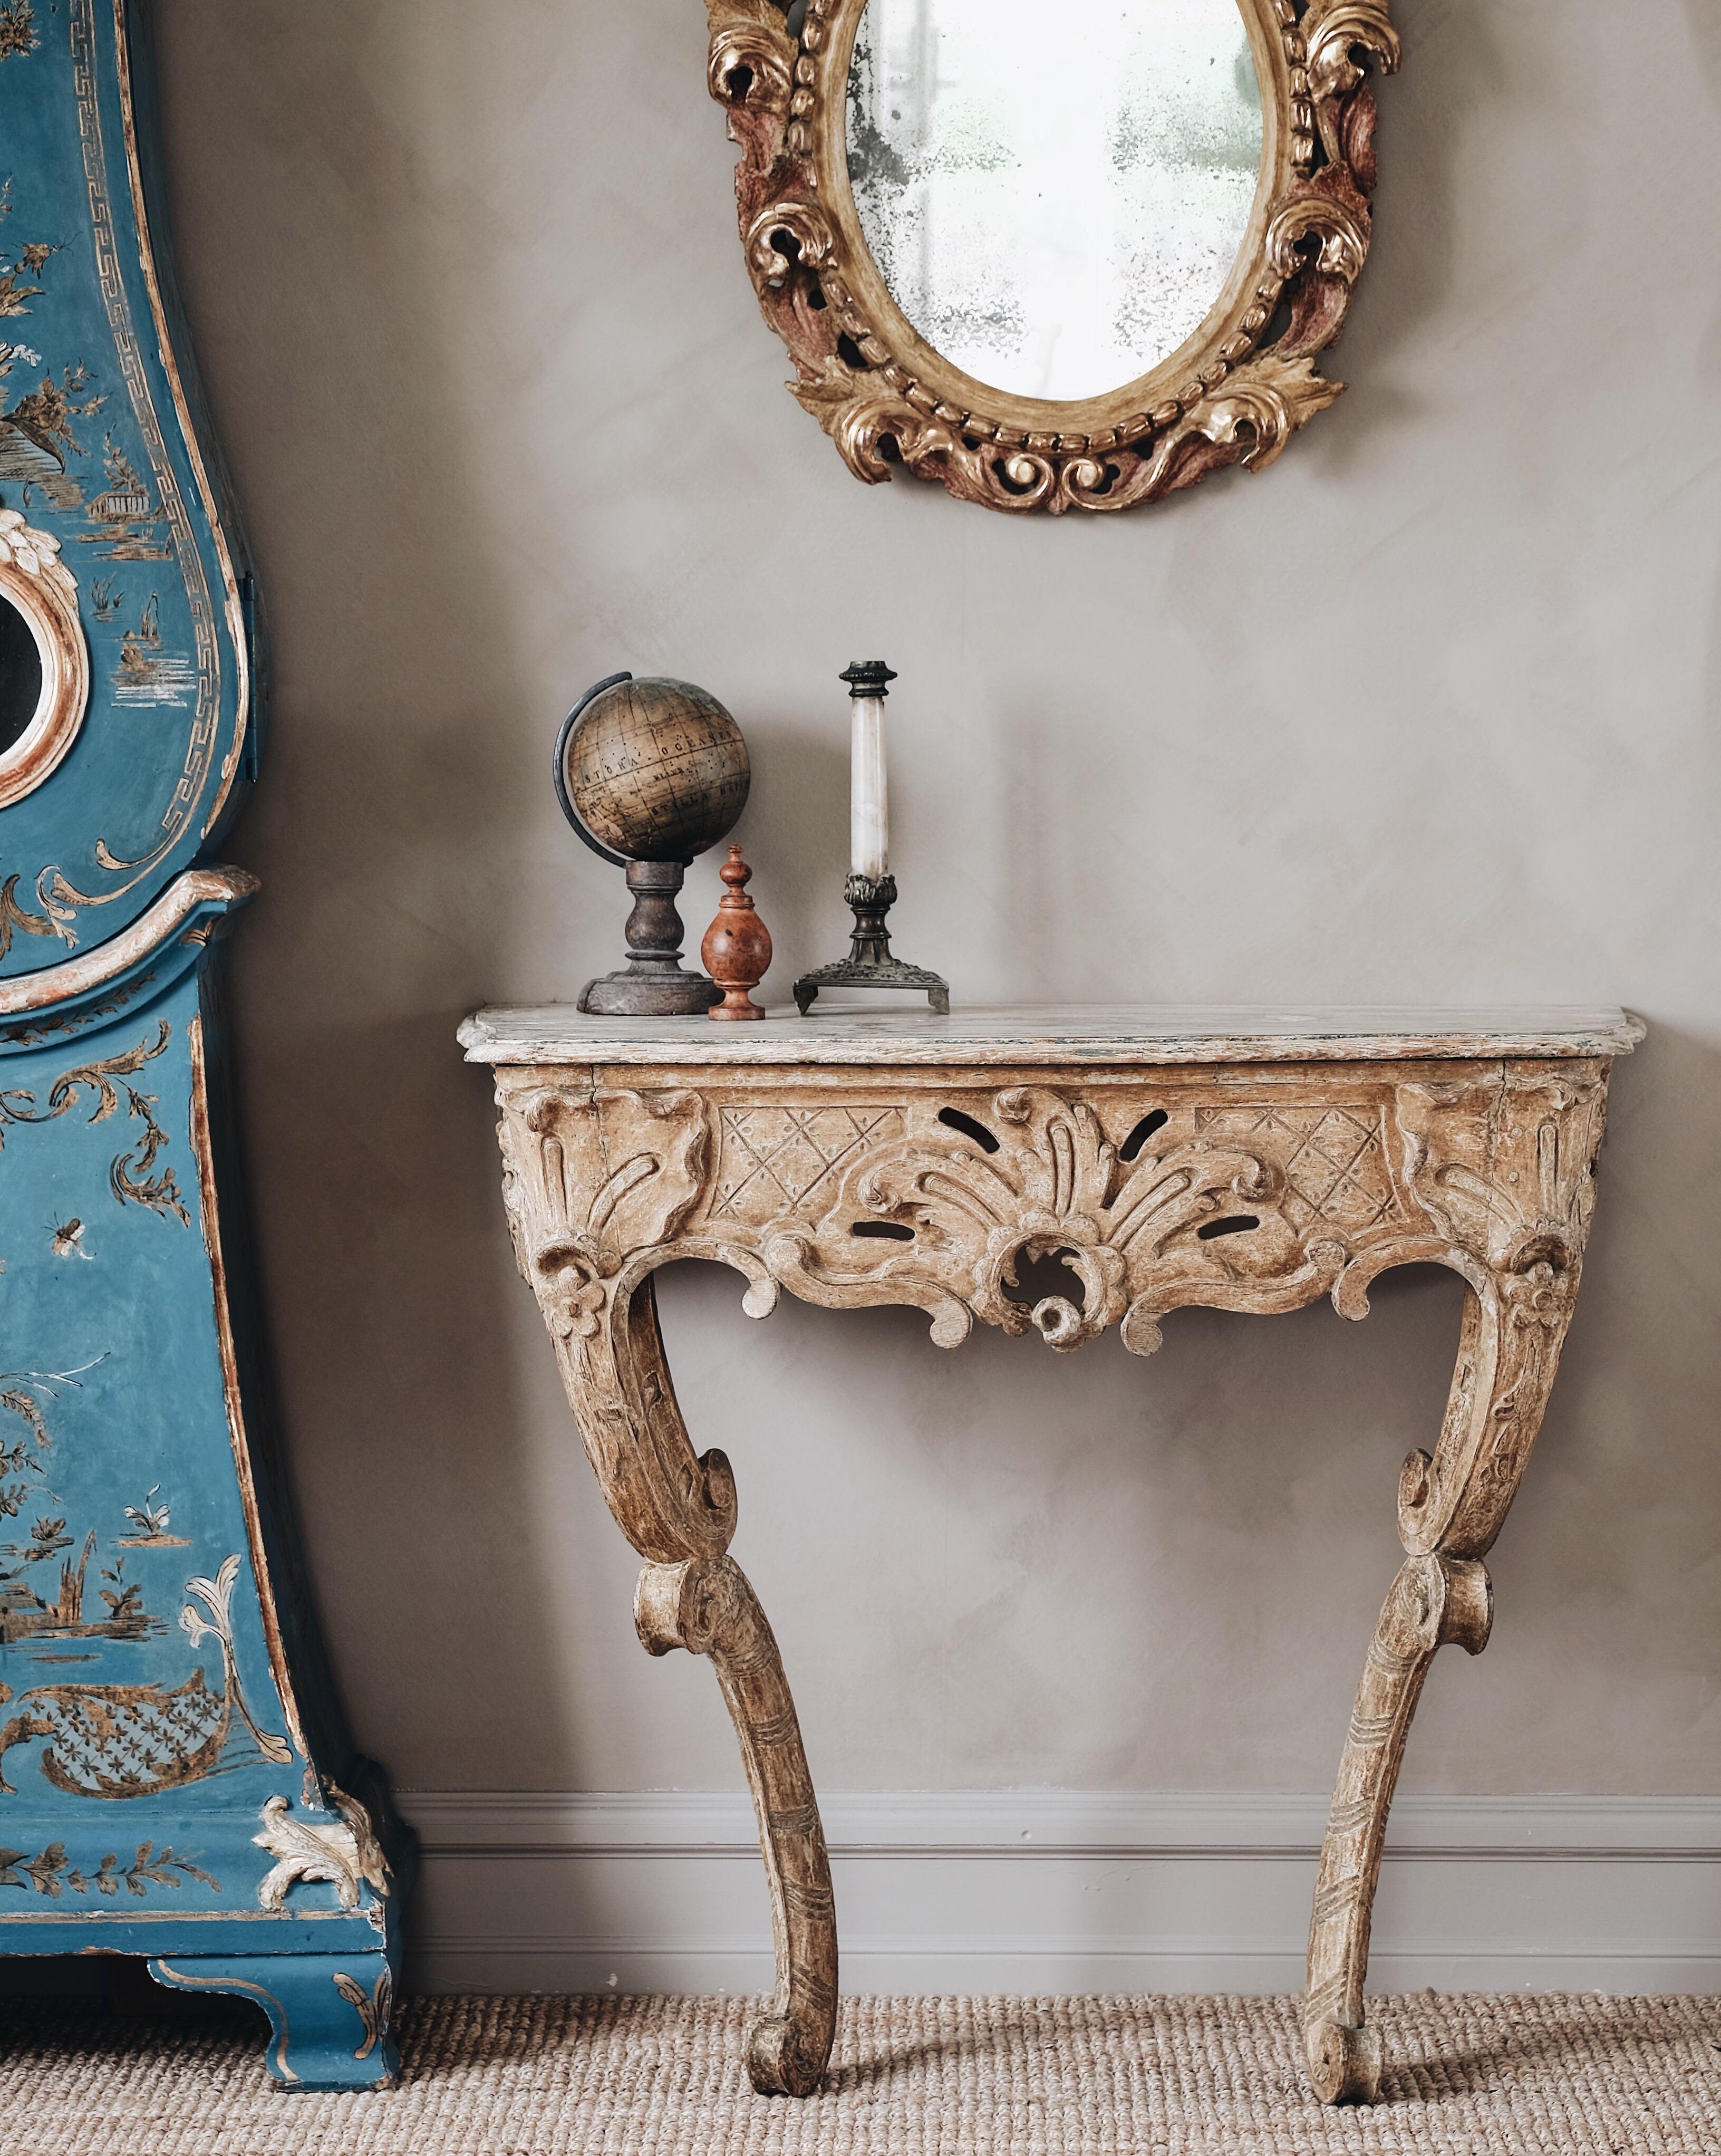 Exceptional 18th century Swedish Rococo console table in its original color, with fine carvings and proportions, circa 1760. 

Good condition with wear and tear consistent with age and use.